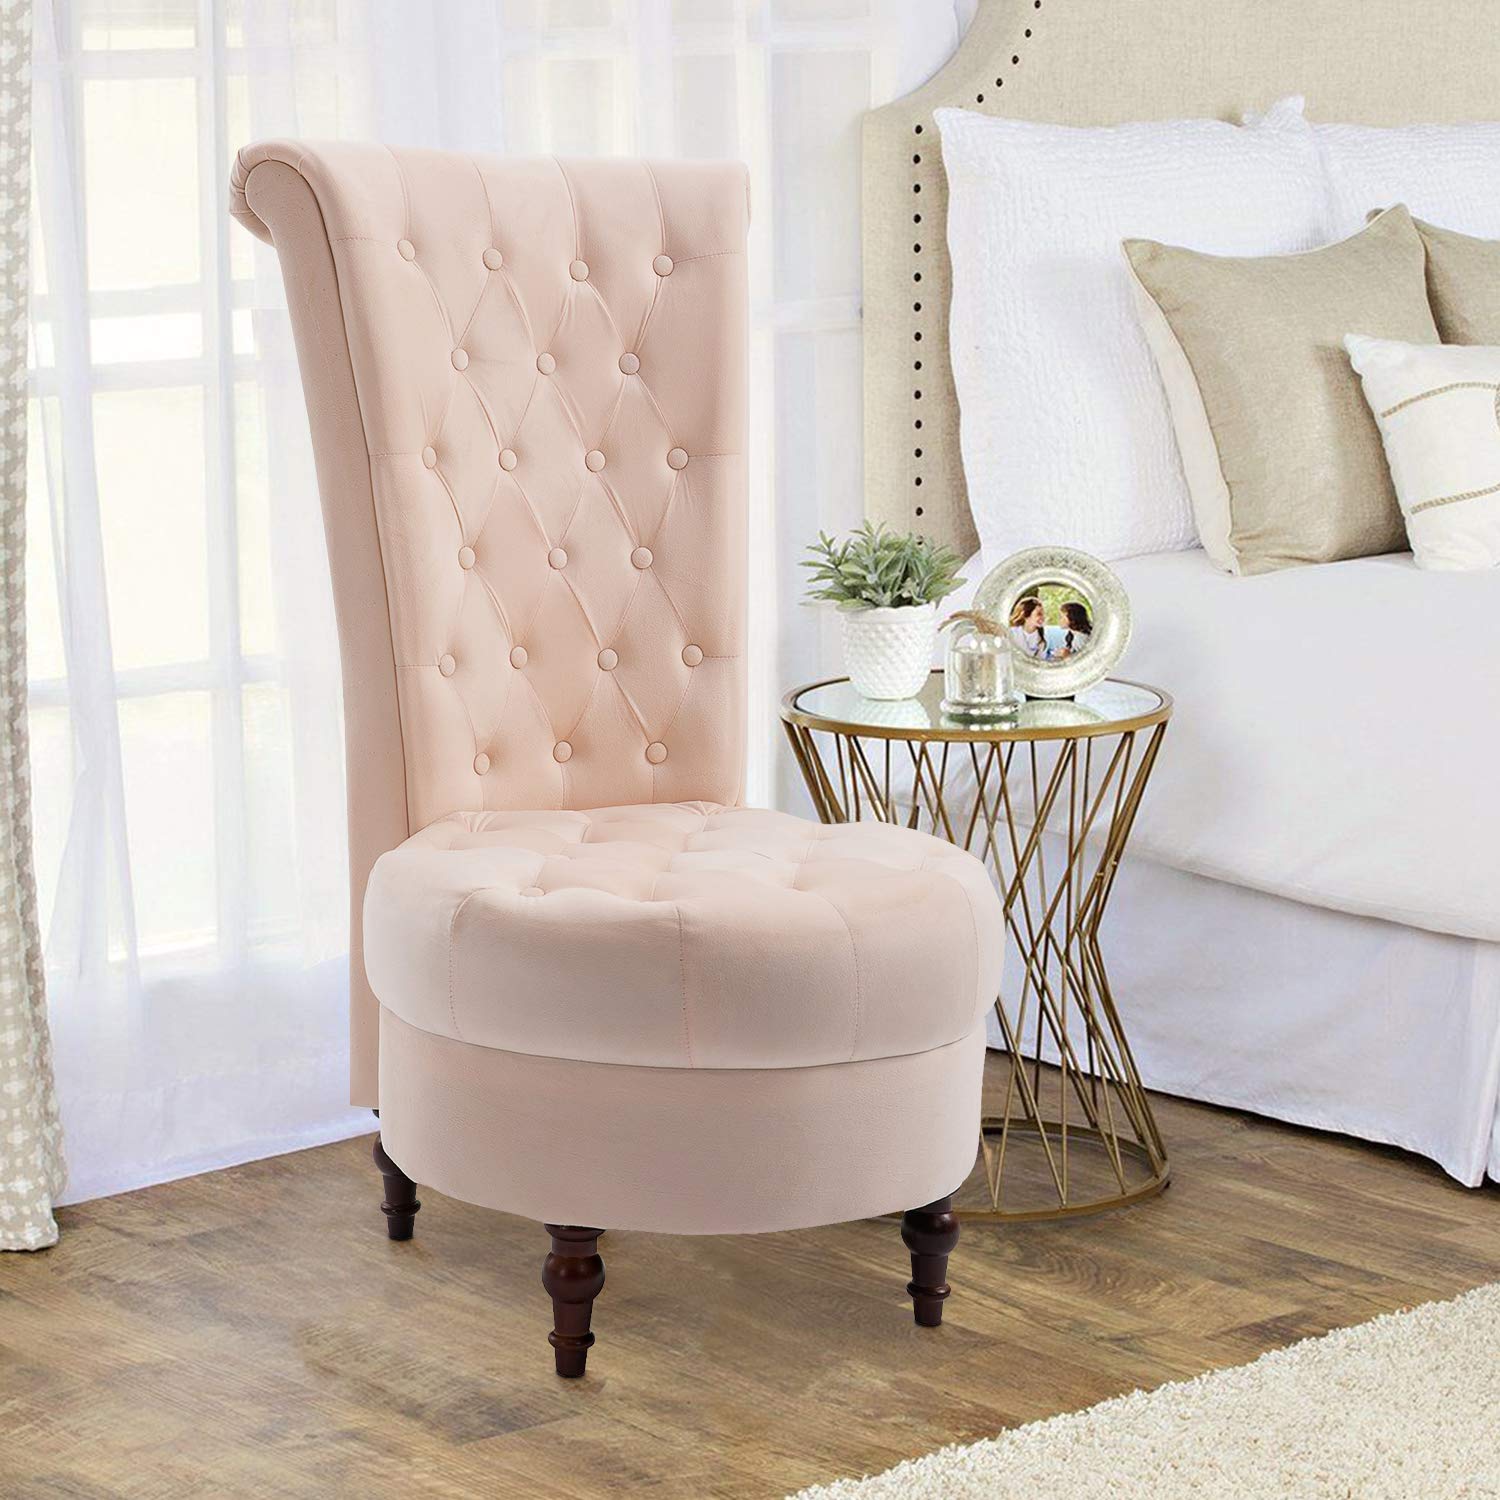 5 Upholstered Chairs To Brighten Up Your Living Room | Storables